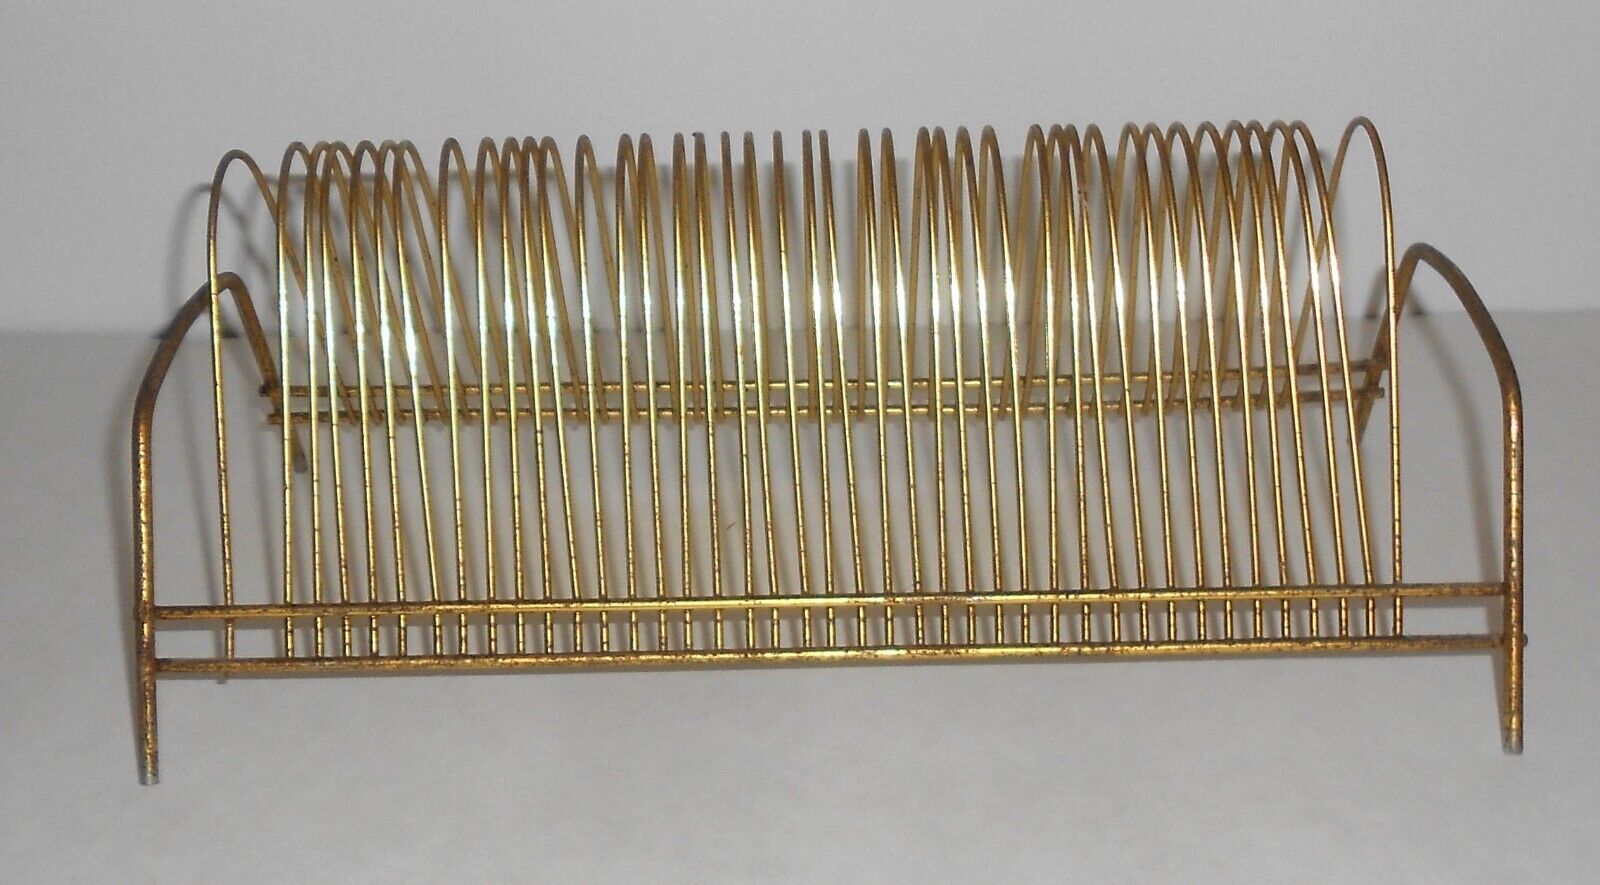 Vintage 1960s 45 RPM Record Gold-Colored Metal Wire Holder Storage Rack Holds 40